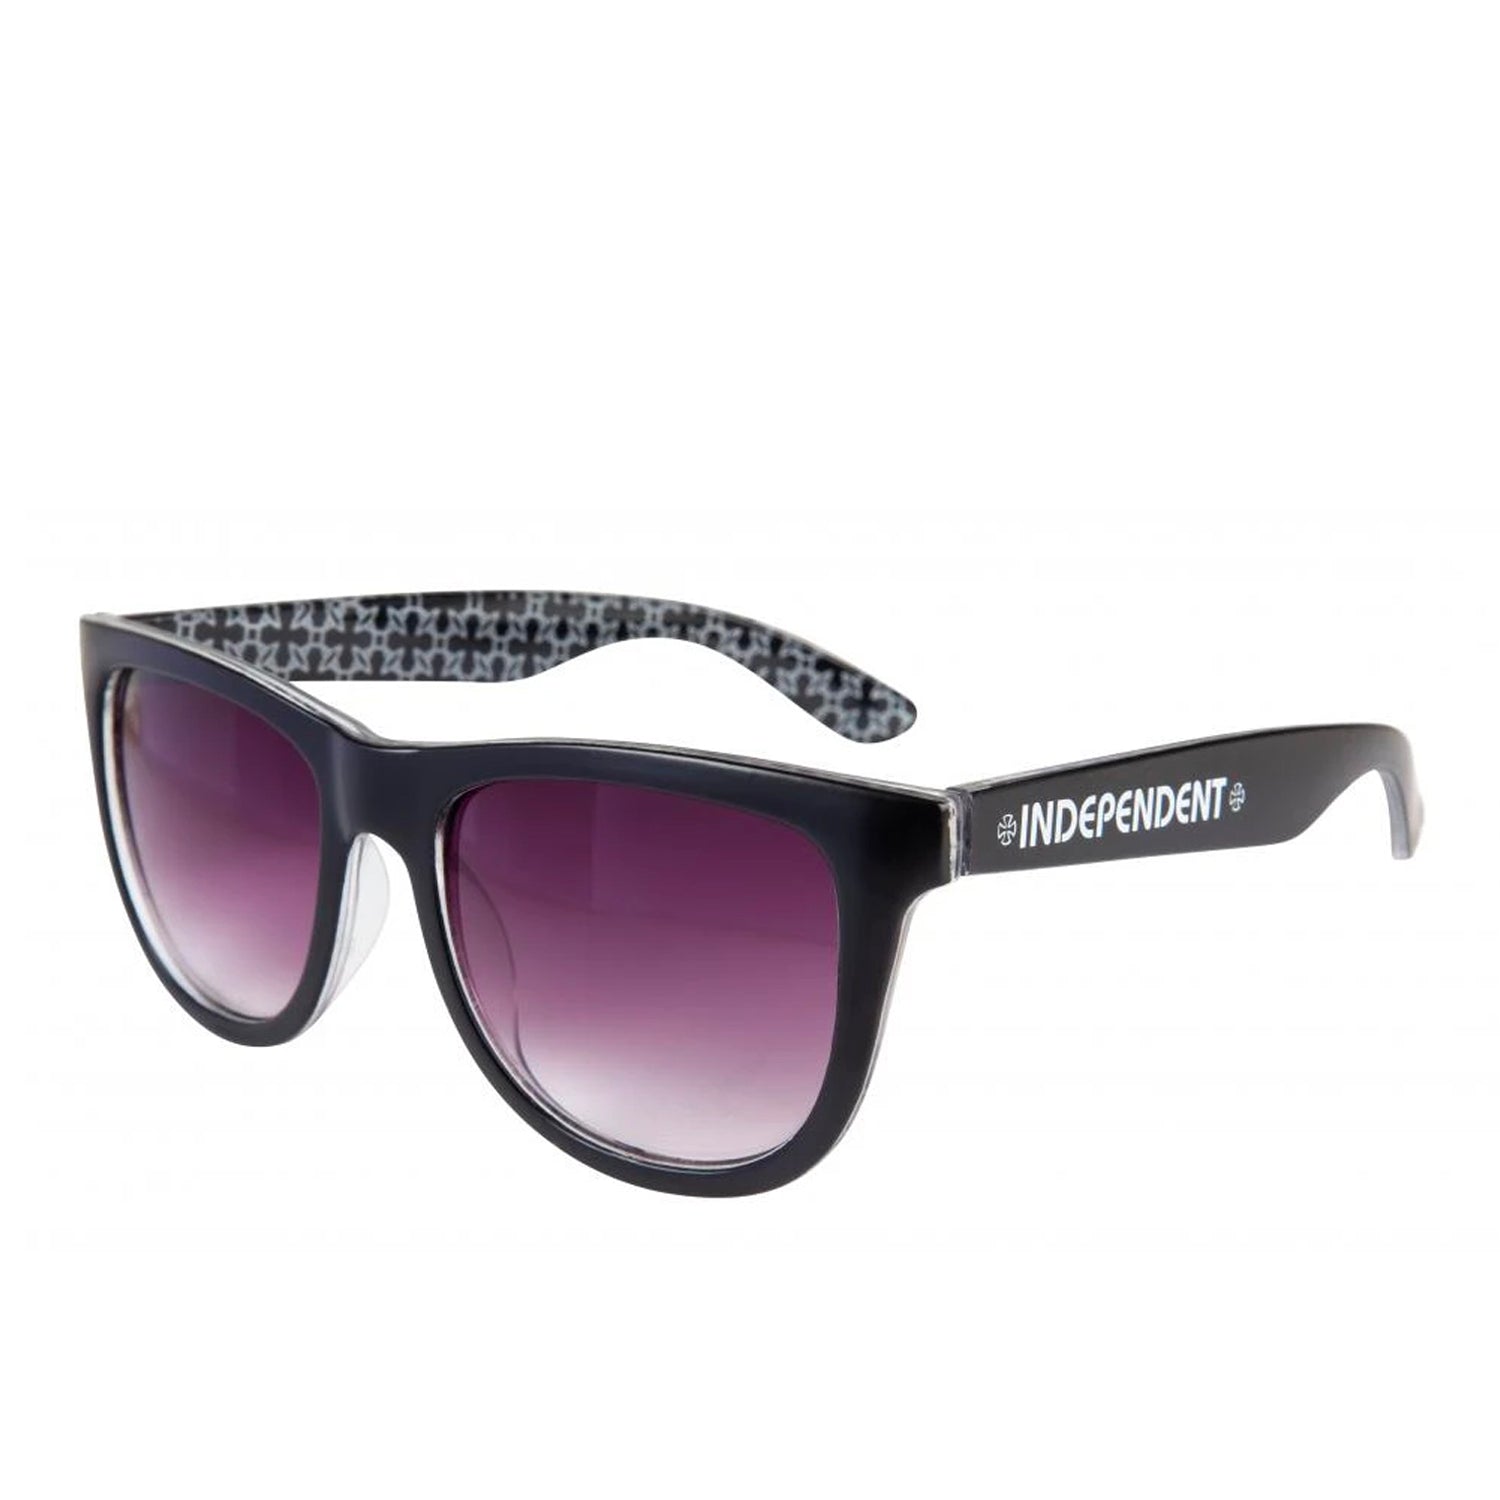 Independent Repeat Cross Sunglasses - Navy / Grey - Prime Delux Store